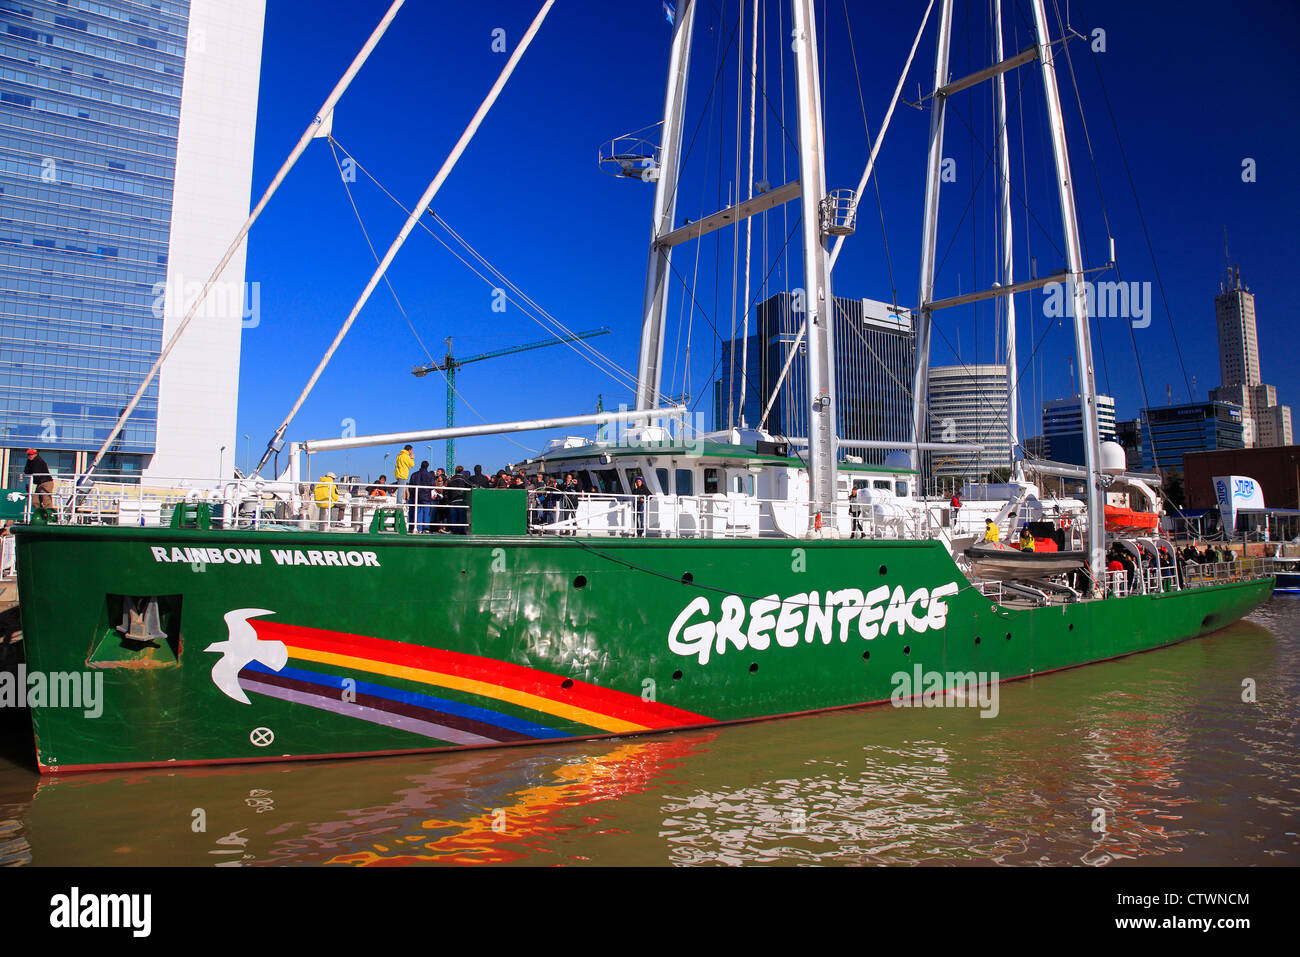 Greenpeace ship "Rainbow Warrior III" in Puerto Madero,  Buenos Aires, celebrating 25 years of Greenpeace in Argentina Stock Photo